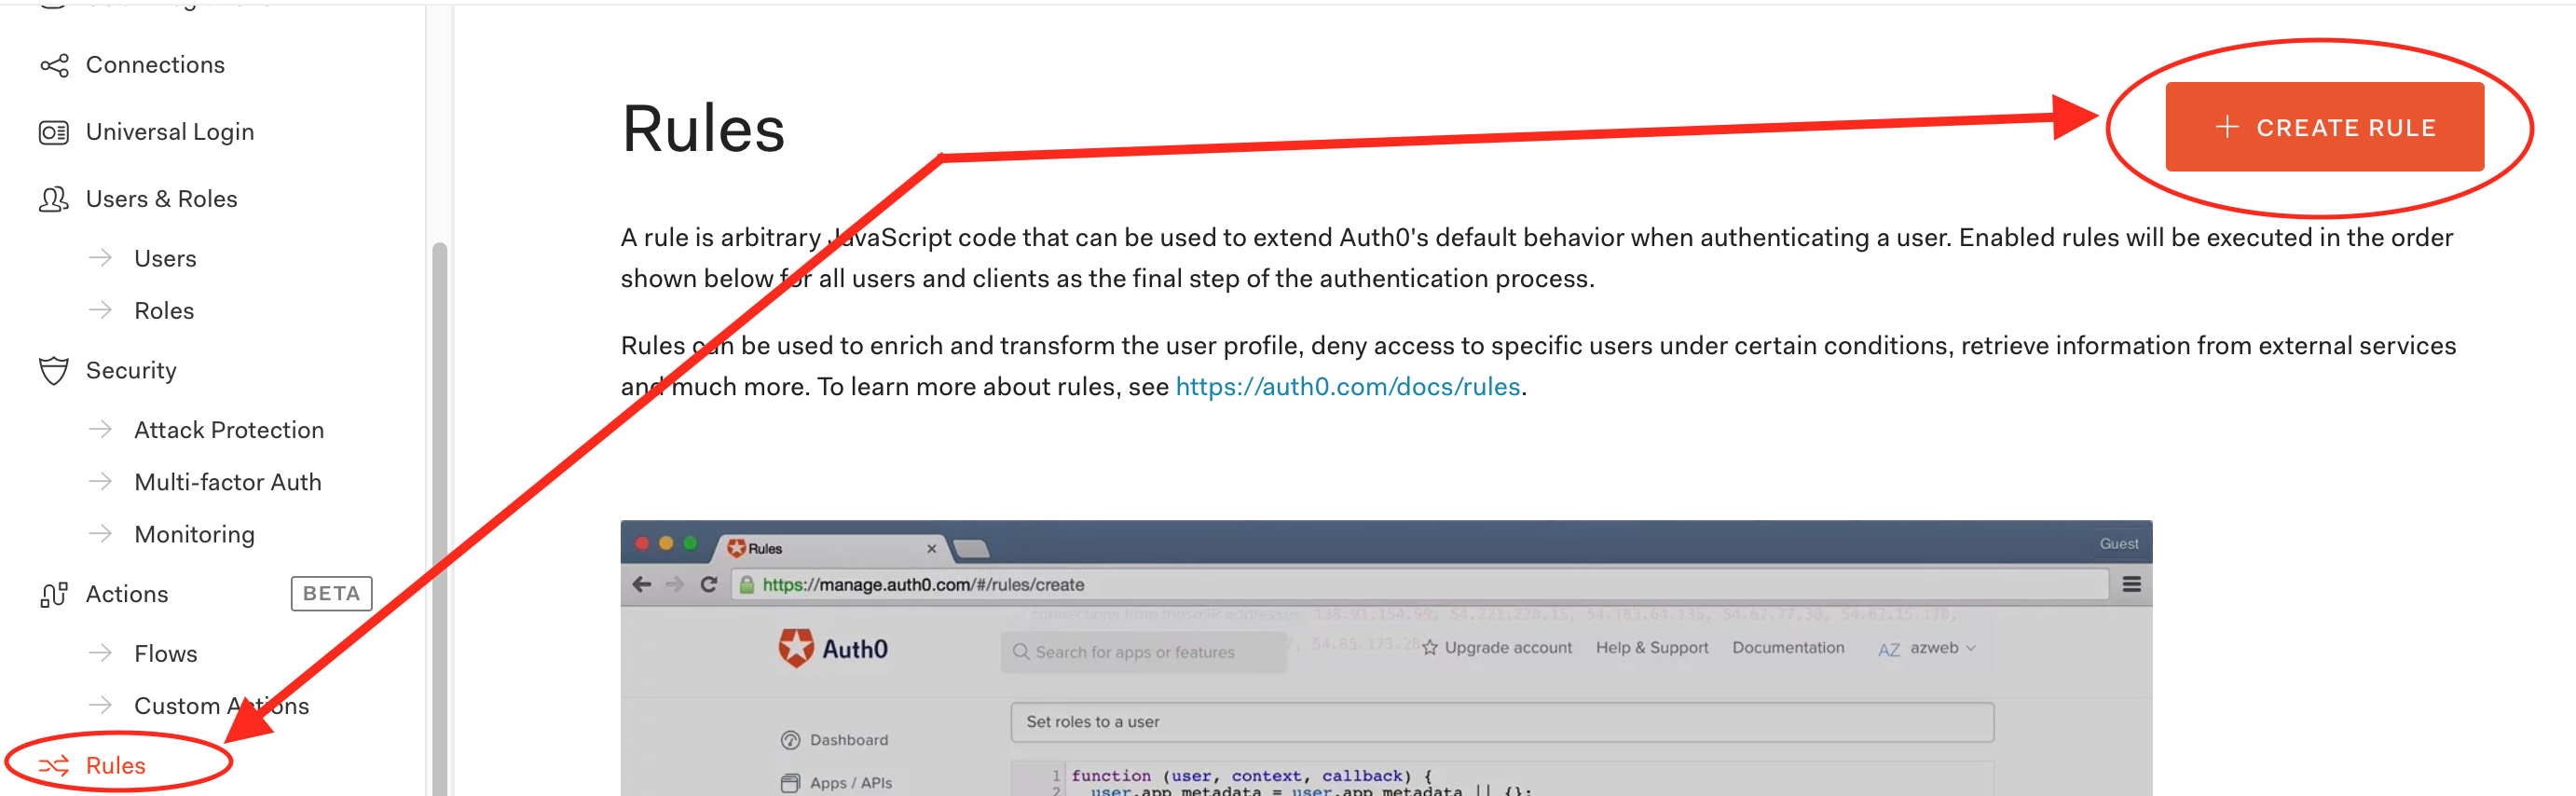 auth0_rule1.png